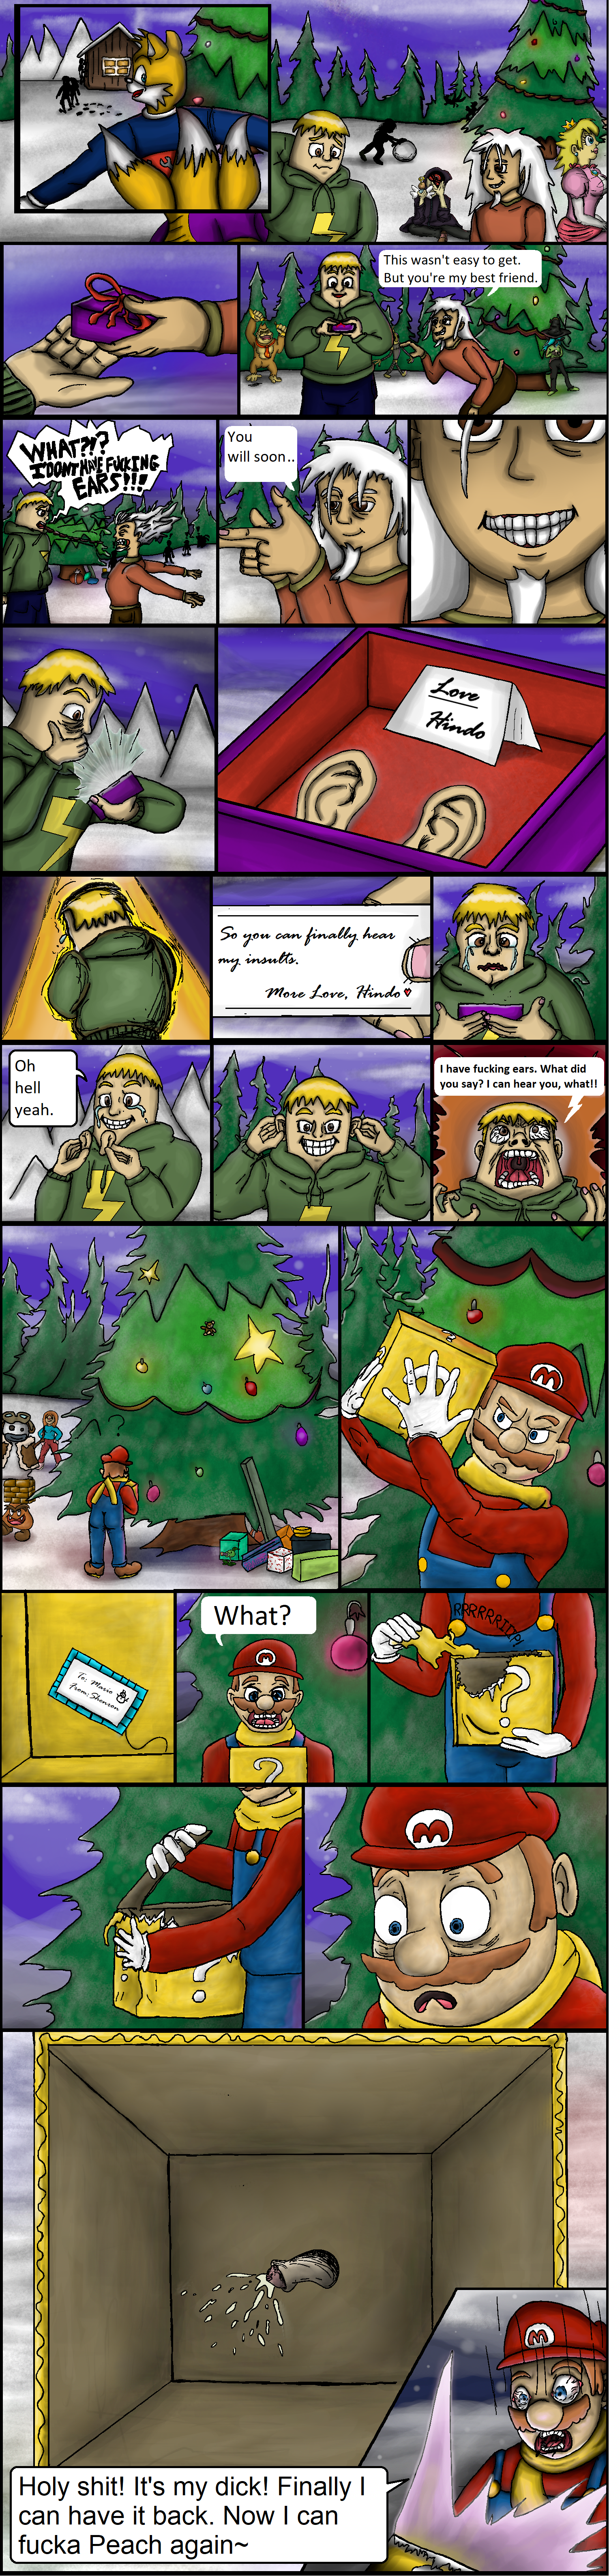 xmas/pg3.png. If you're seeing this, enable images. Or, perhaps we have a website issue. Try refreshing, if unsuccessful email c@commodorian.org with a detailed description of how you got here.